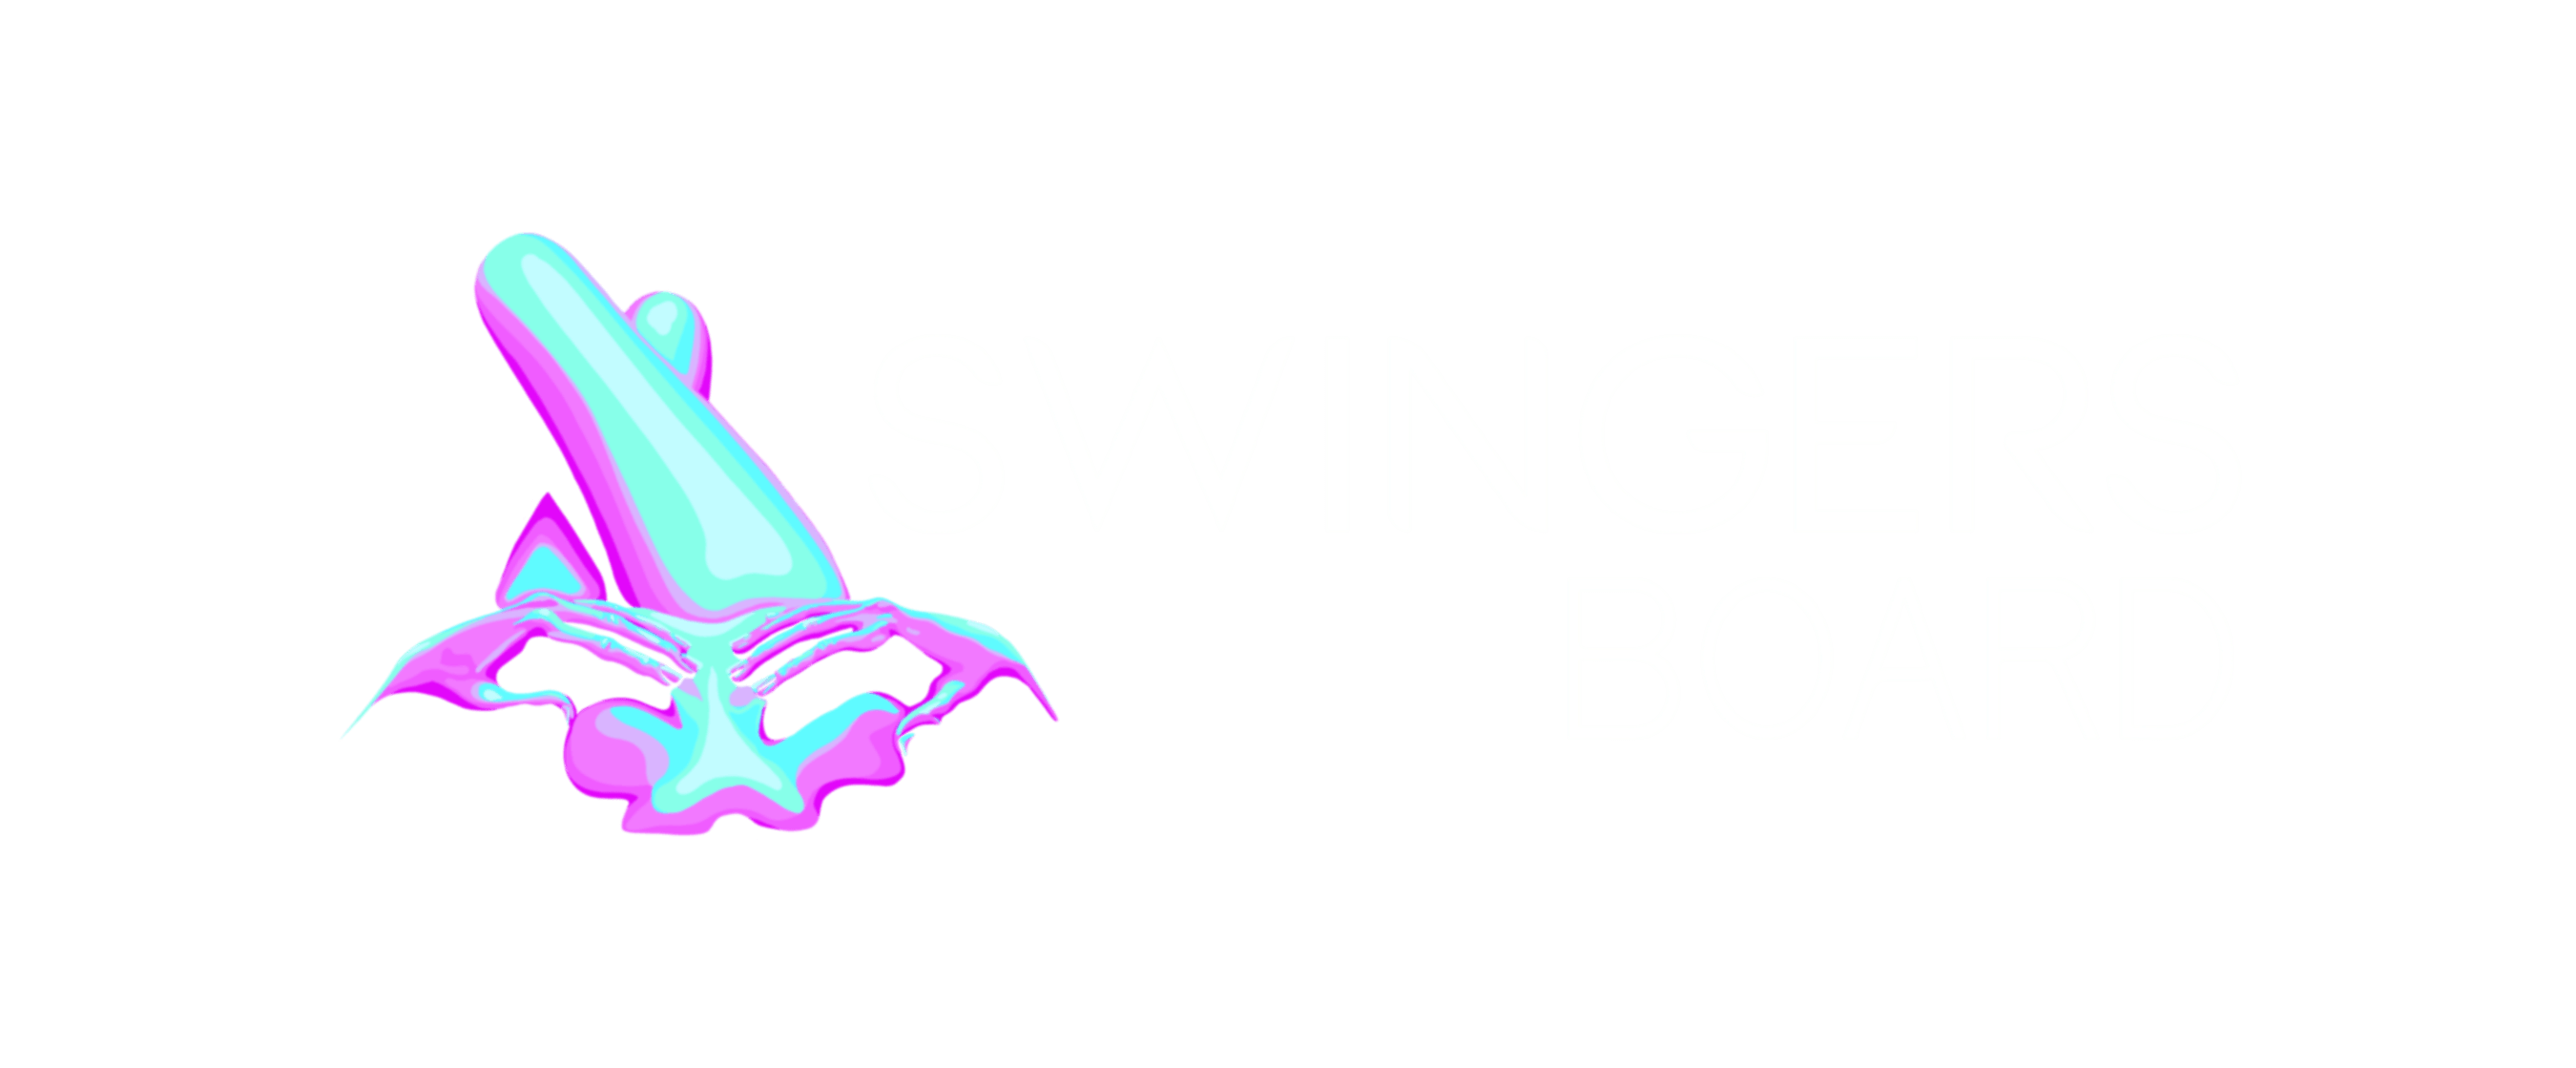 🌈🌈🌈𝟏𝟖𝟖𝟖𝟕𝟏𝟎𝟖𝟏𝟒𝟔 🌈🌈 United Airlines First Class Reservation Number🌈🌈 - Swinging Situational HELP! - Swingers Board